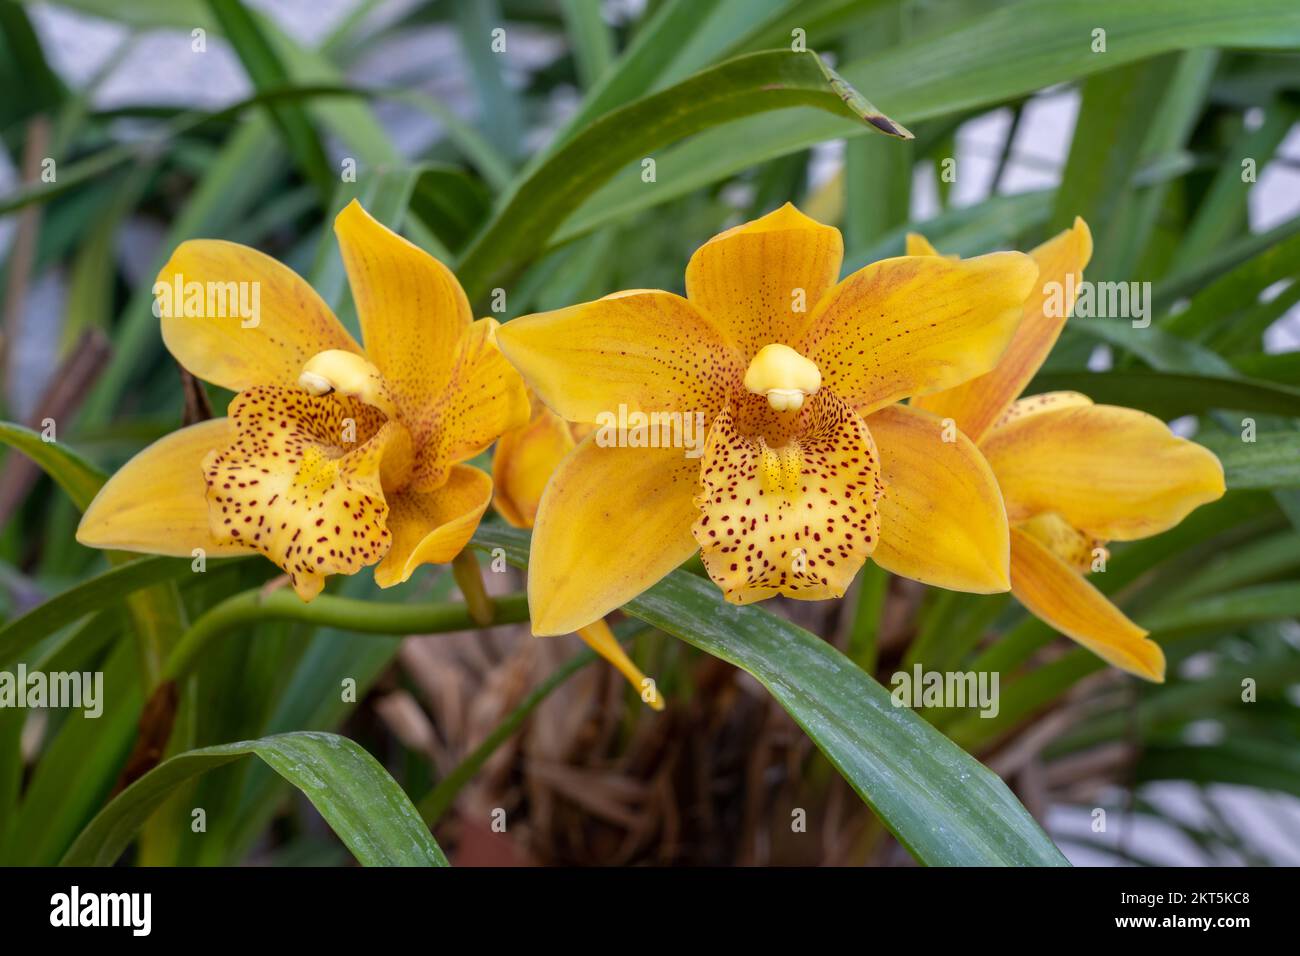 Closeup view of colorful yellow and brown flowers of cymbidium terrestrial orchid hybrid blooming outdoors in garden Stock Photo